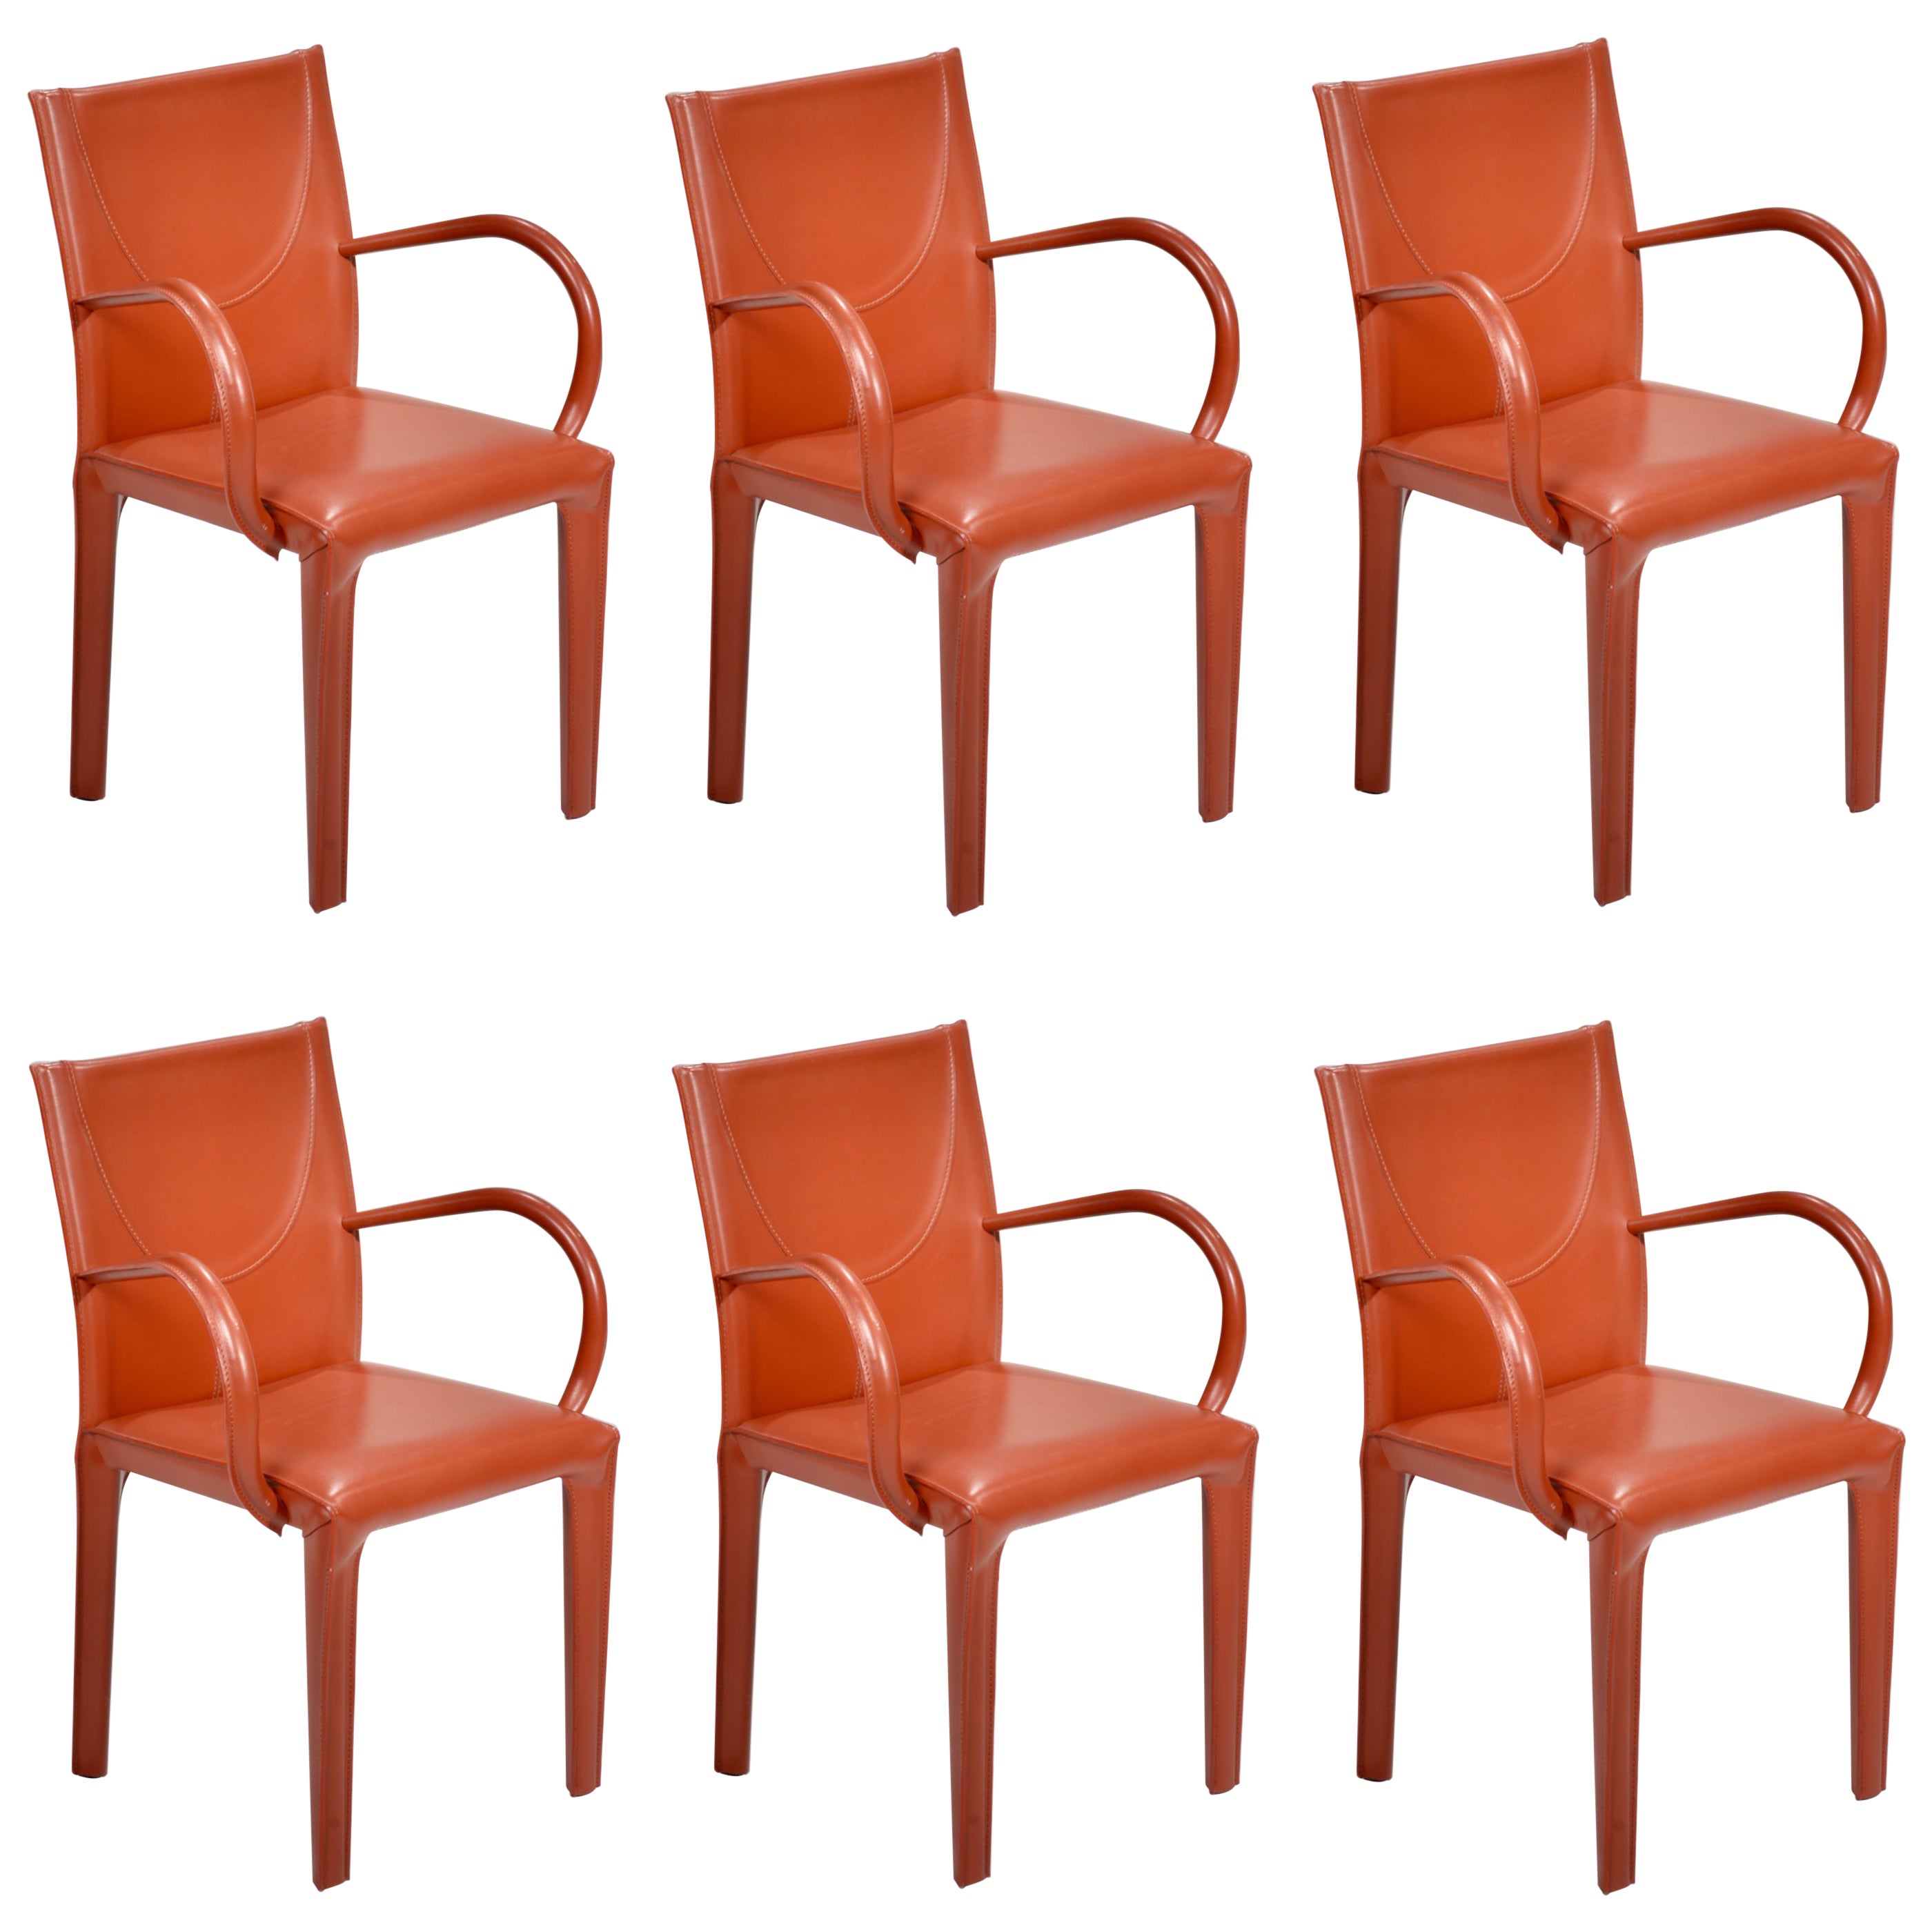 Set of 6 Italian Post Modern Leather Dining Armchairs by Arper, c1985